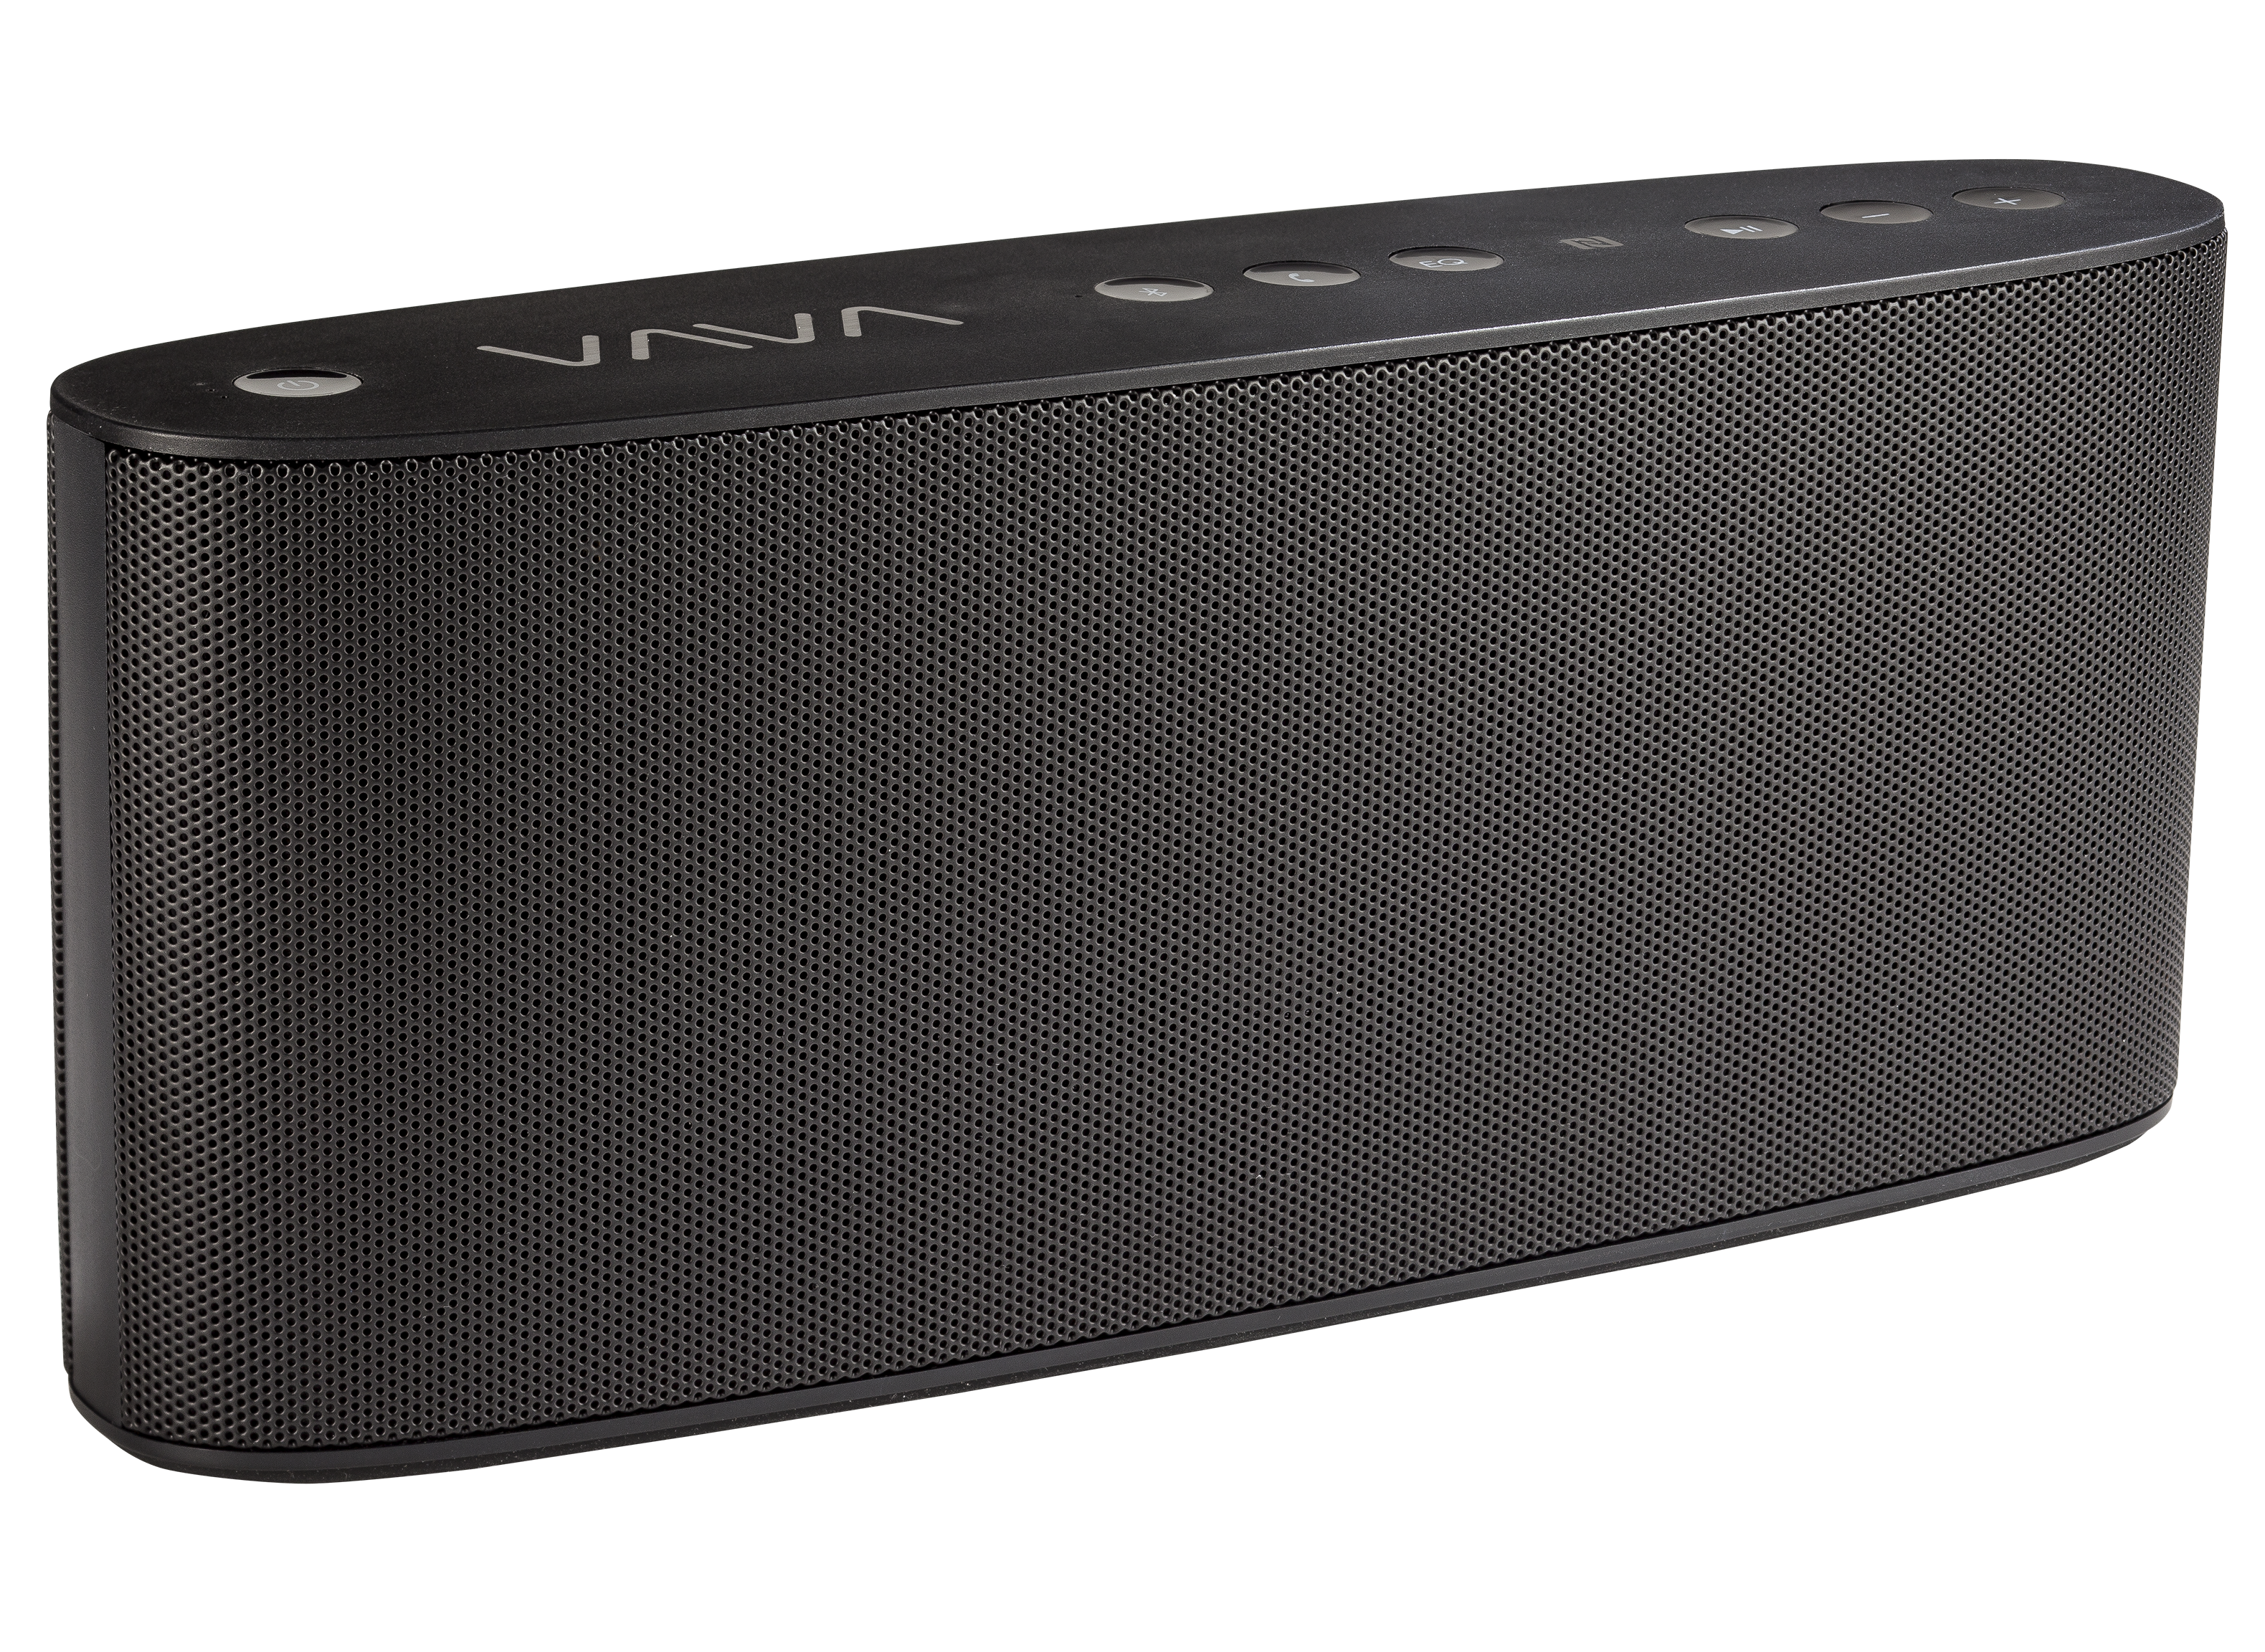 https://crdms.images.consumerreports.org/prod/products/cr/models/392850-wirelessspeakers-vava-vavavoom21.png